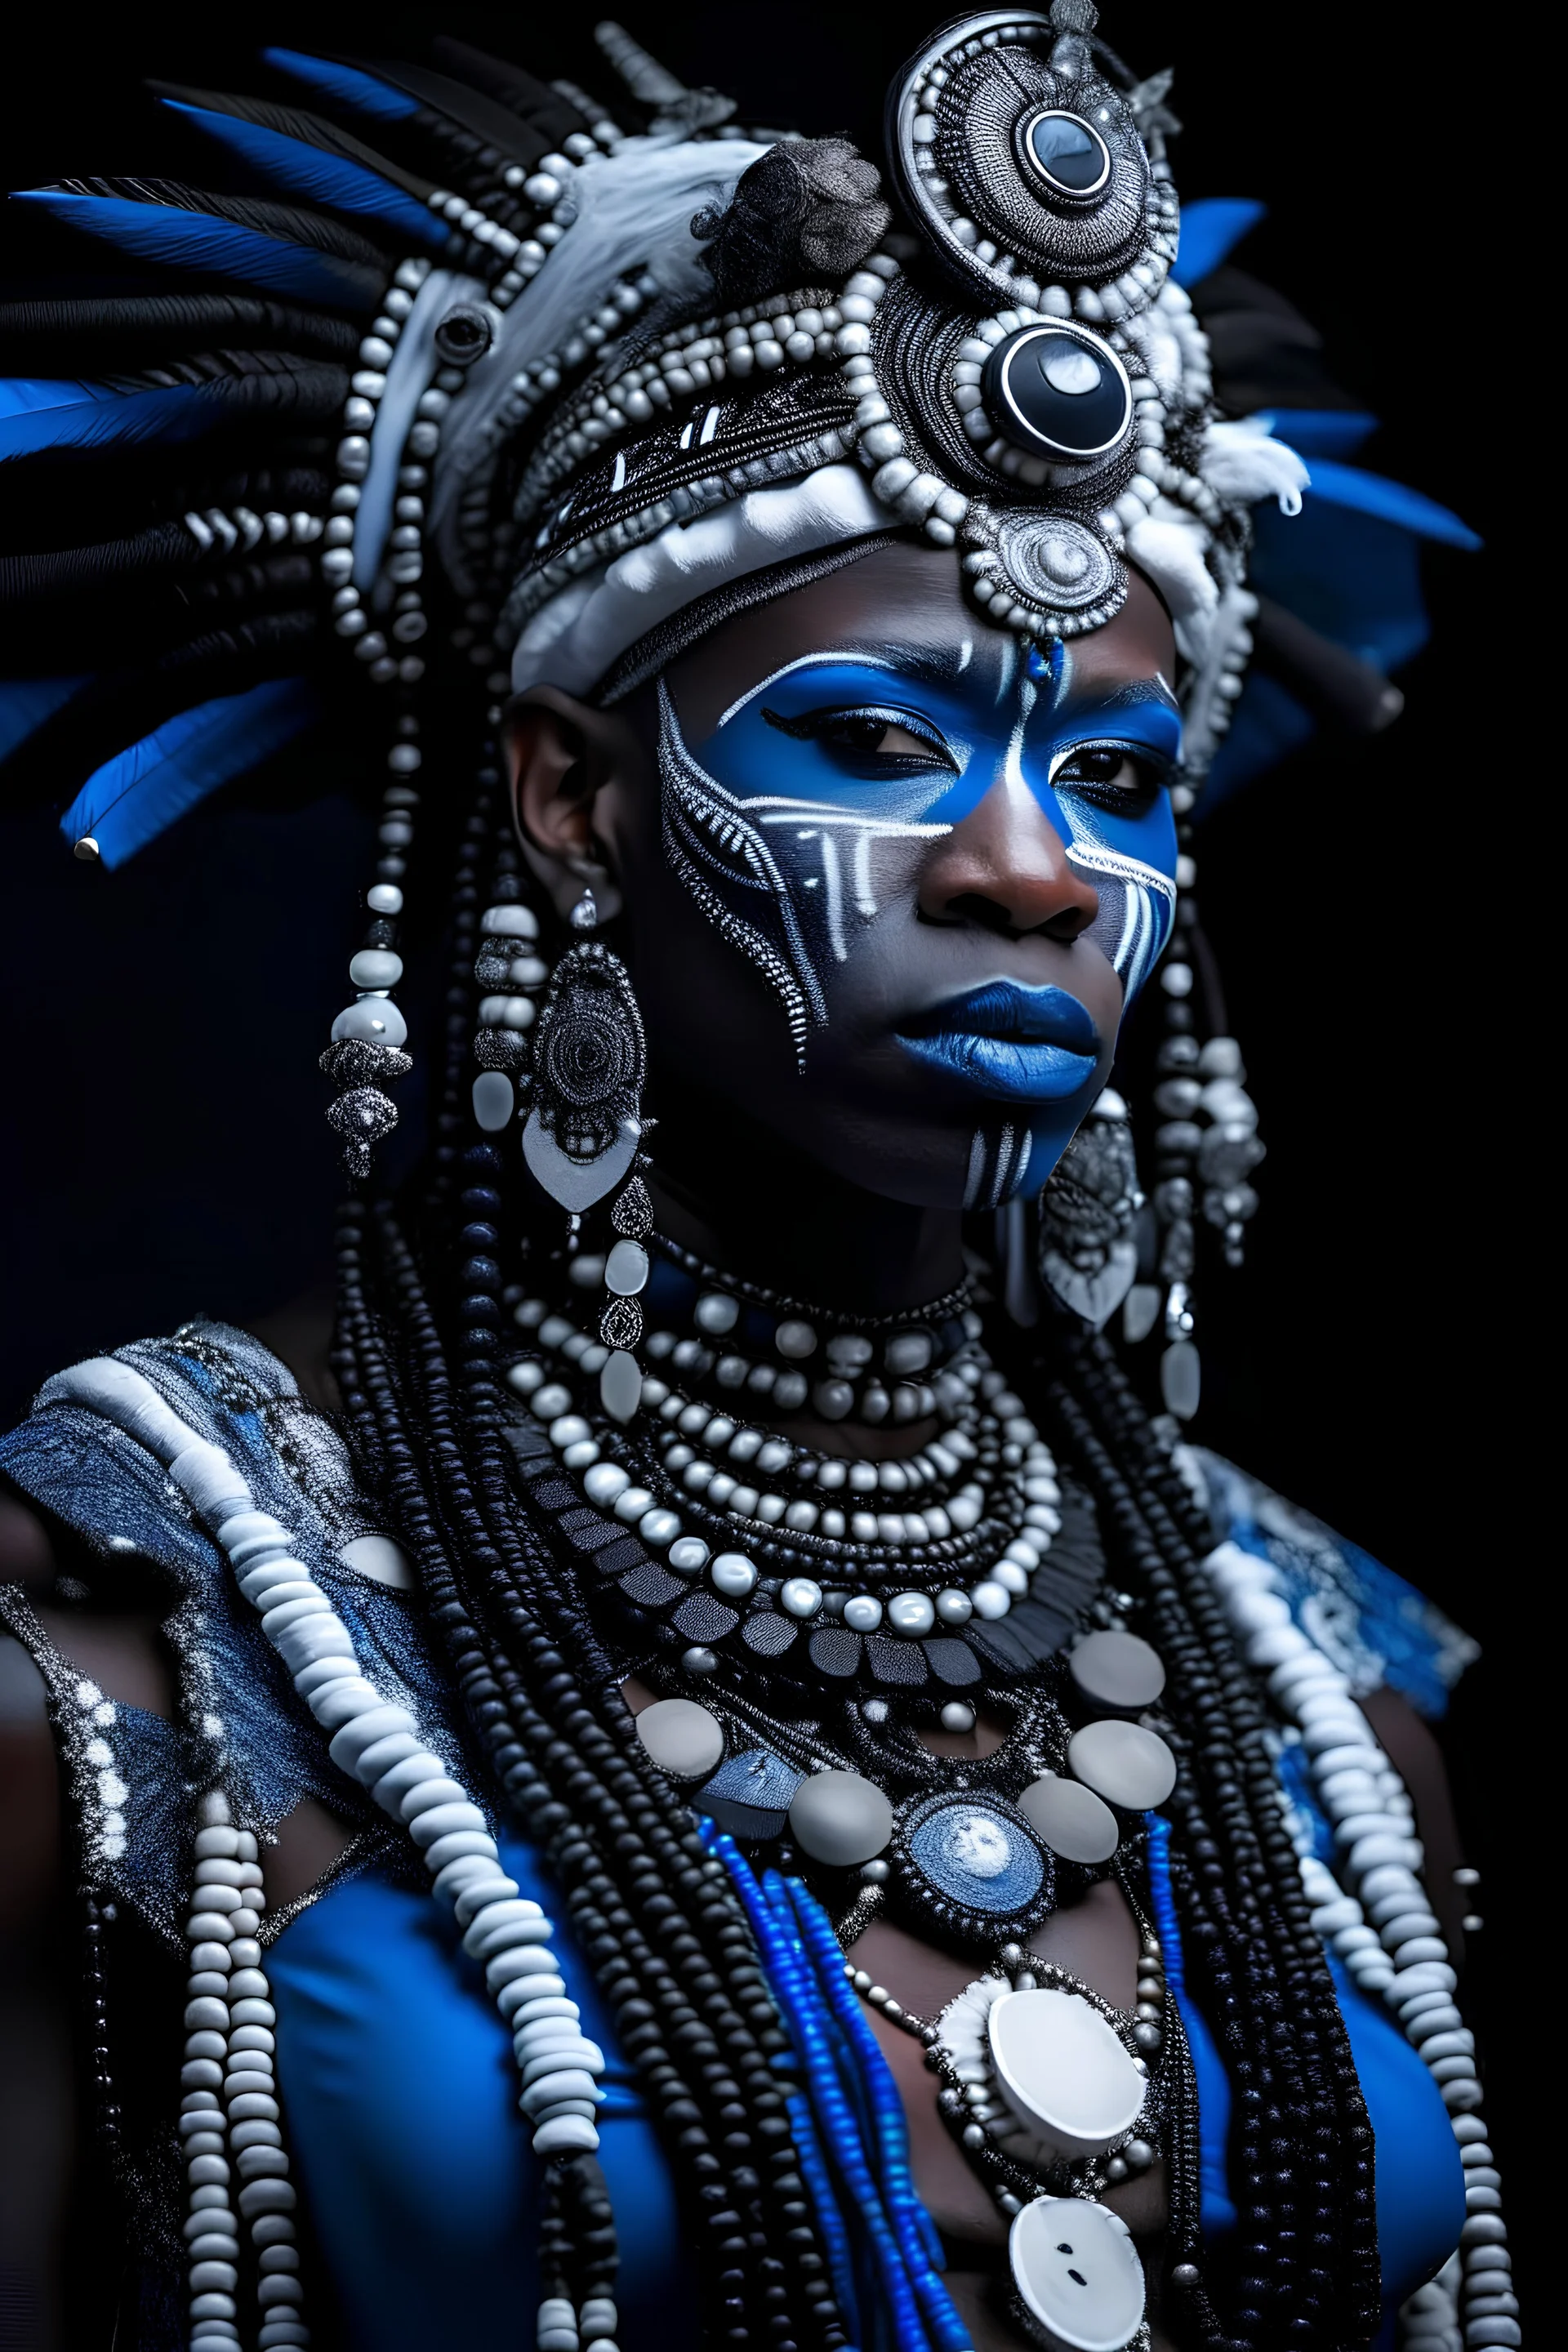 Beautifull white african ancient Greek Göd Hades shaman technoreaism t portrait, adorned with techno robotics ancient greek tribal headdress wearing technorobotics black steal chain effected ancient greek armour l beads and flowers metallic multichrome lace effected masque wearing azurite blue and black onix mineral stone voidcore robotics dress jacket organic bio spinal ribbed detail of multichrome robotics ancient Greek rainy background extremely detailed hyperrealistic concept portrait